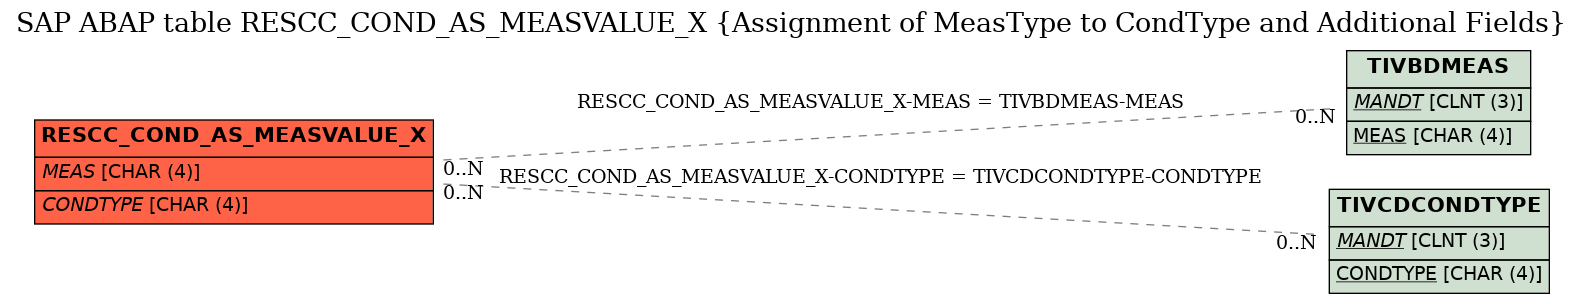 E-R Diagram for table RESCC_COND_AS_MEASVALUE_X (Assignment of MeasType to CondType and Additional Fields)